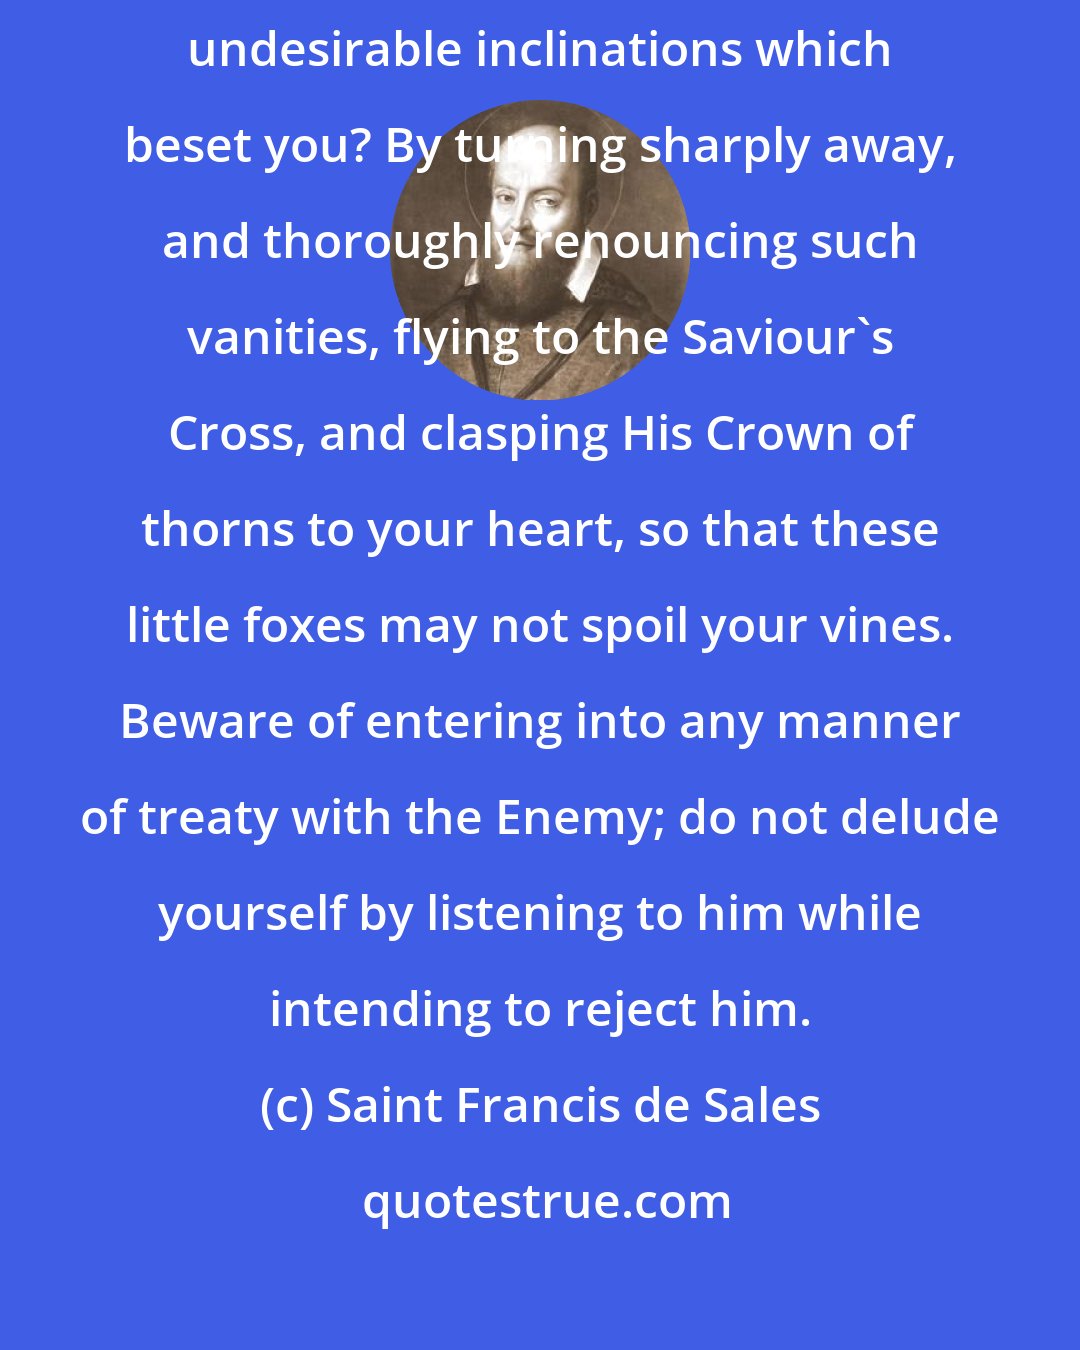 Saint Francis de Sales: How are you to meet the swarm of foolish attachments, triflings, and undesirable inclinations which beset you? By turning sharply away, and thoroughly renouncing such vanities, flying to the Saviour's Cross, and clasping His Crown of thorns to your heart, so that these little foxes may not spoil your vines. Beware of entering into any manner of treaty with the Enemy; do not delude yourself by listening to him while intending to reject him.